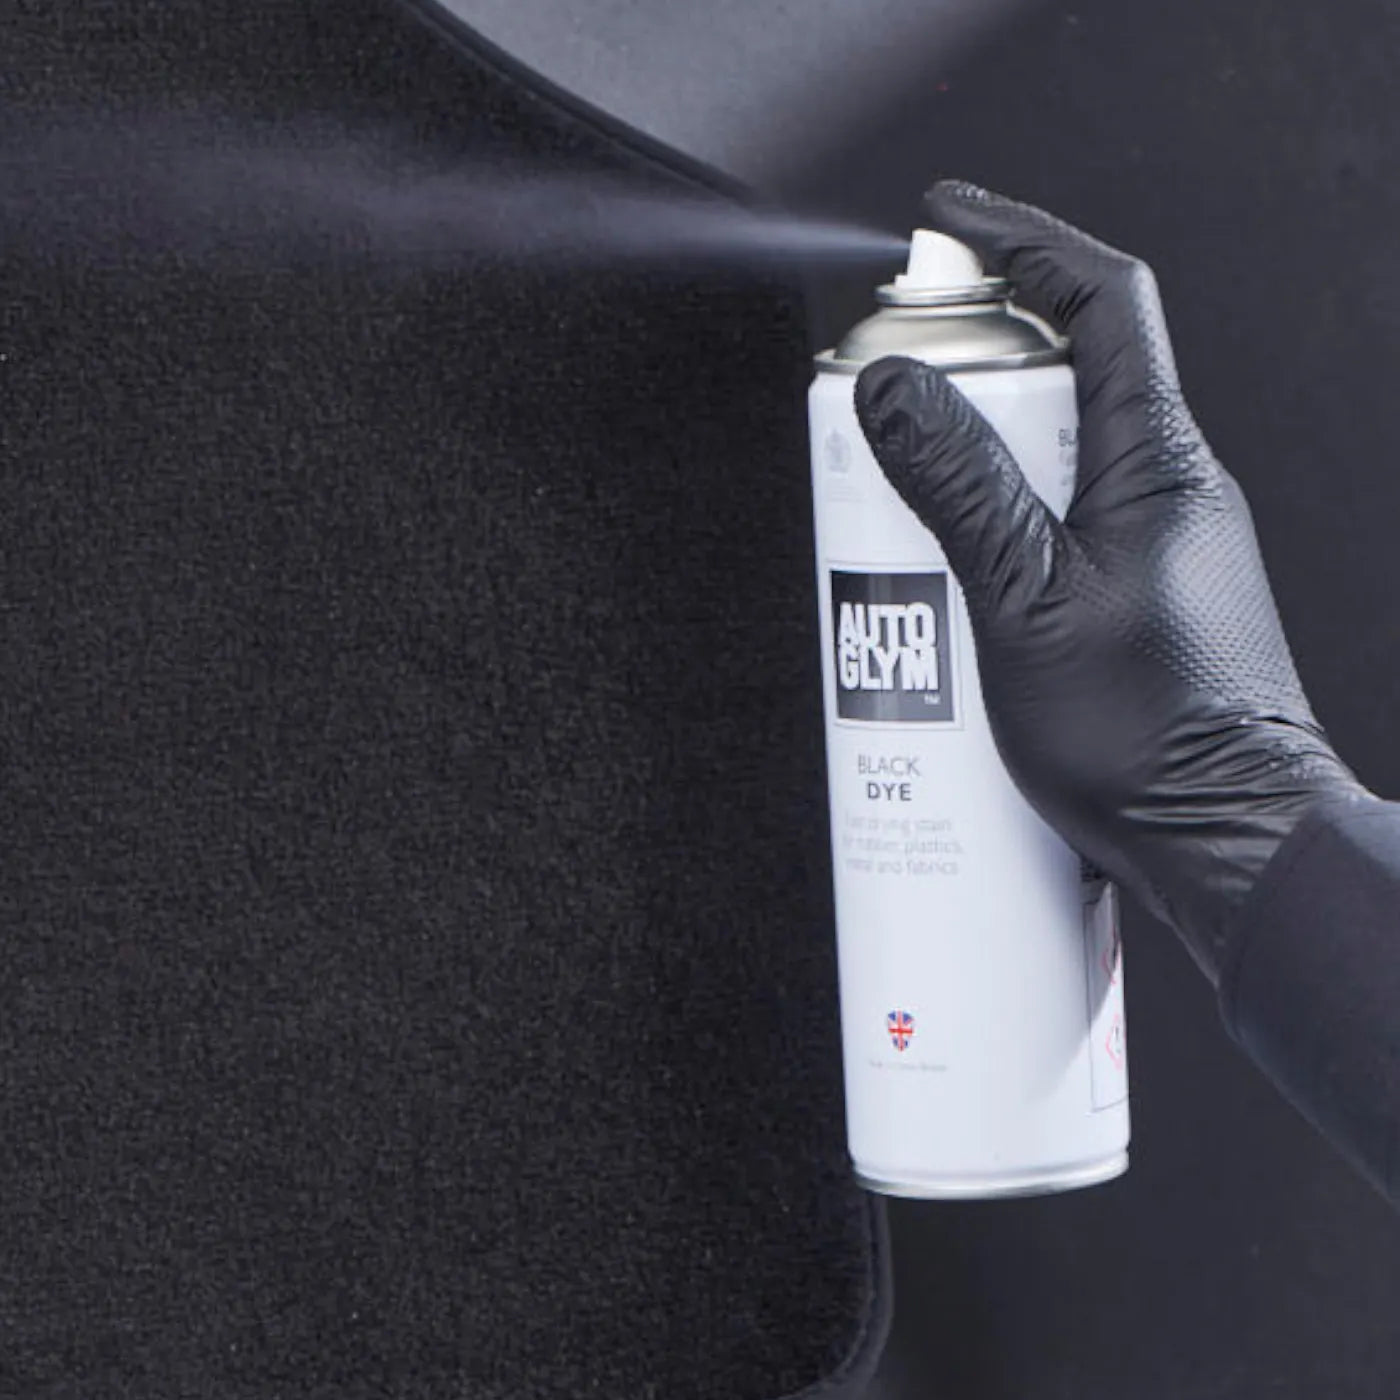 Autoglym Black Carpet Dye. Autoglym Ireland. Autoglym Black Dye is a fast-drying stain for a wide variety of surfaces to restore or improve appearance of tyres, rubber mats, carpets, fibreboard facings and unpainted plastic mouldings or bumpers. Autoglym Ireland